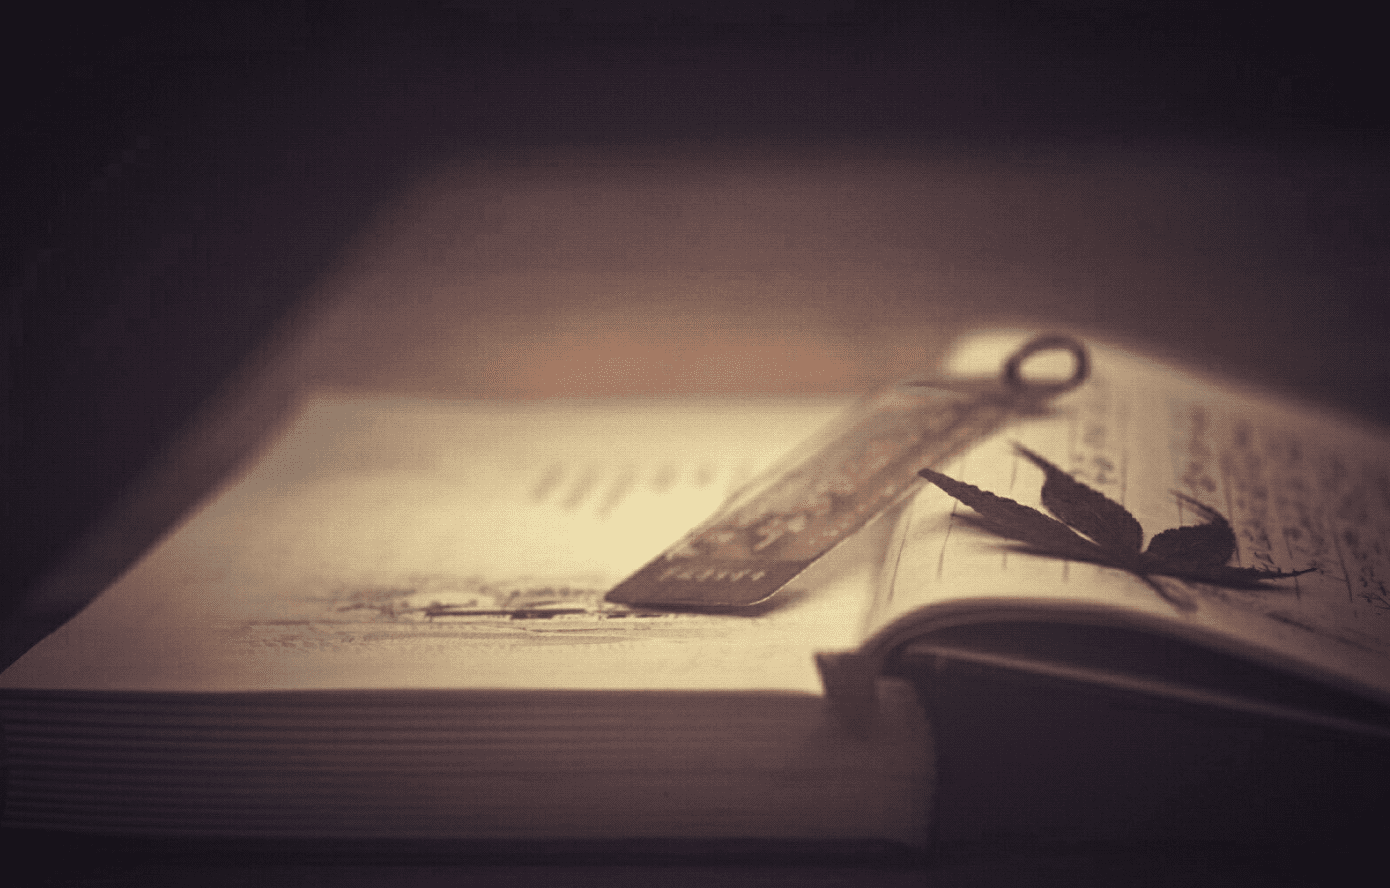 An old book. | Source: flickr.com